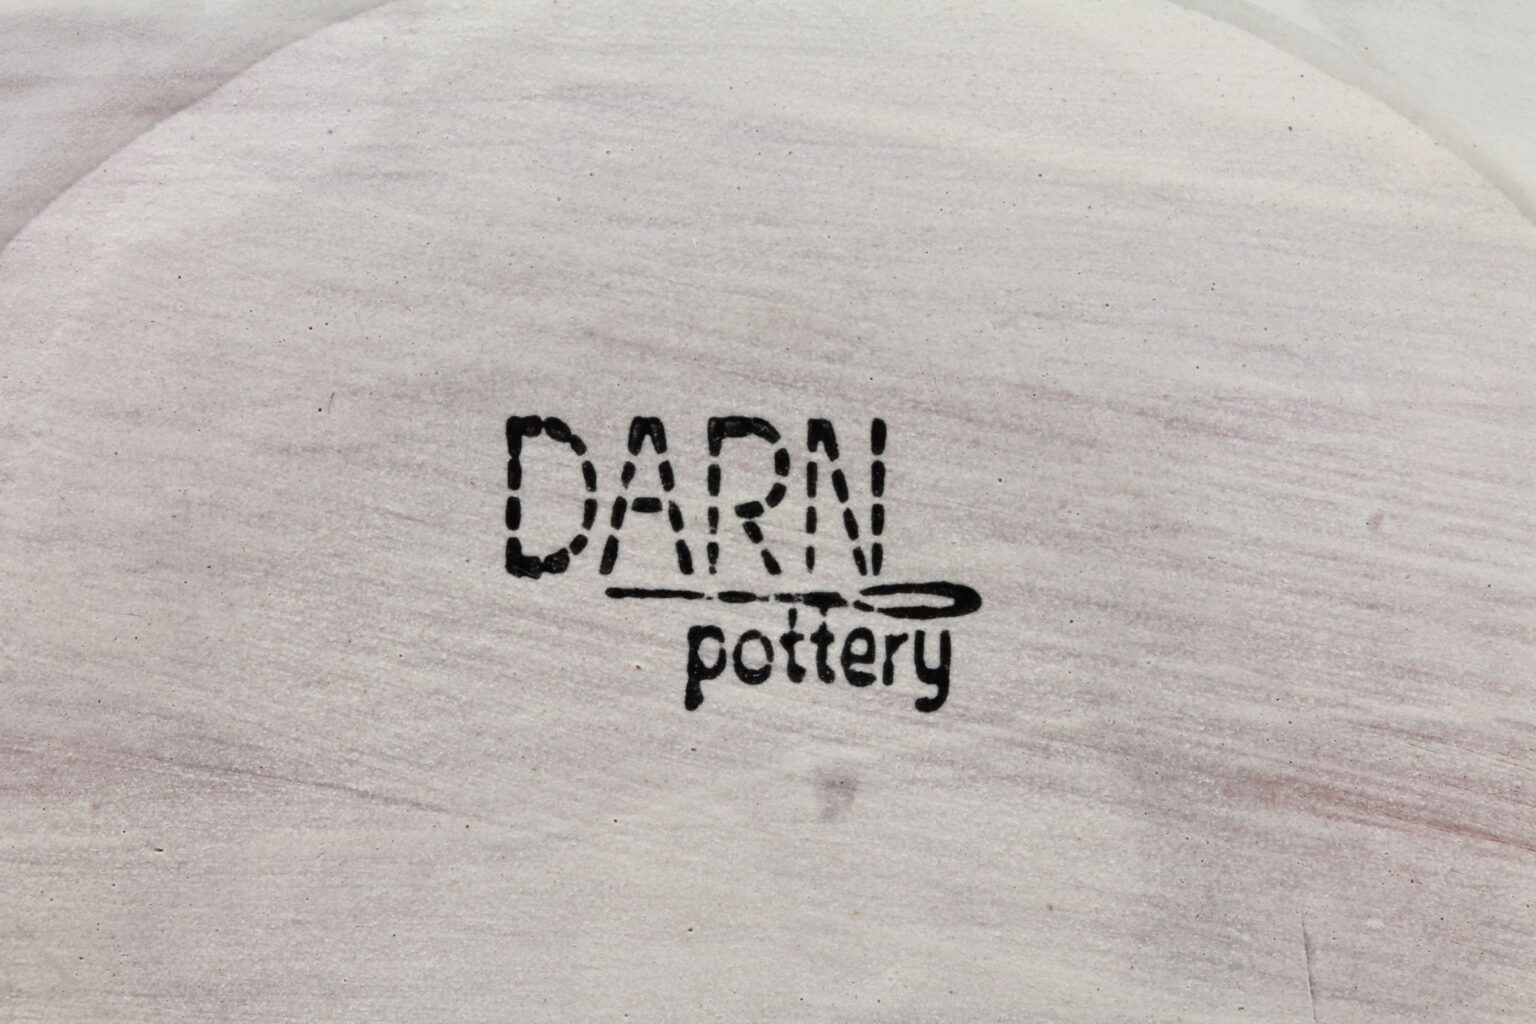 Made by Darn Pottery